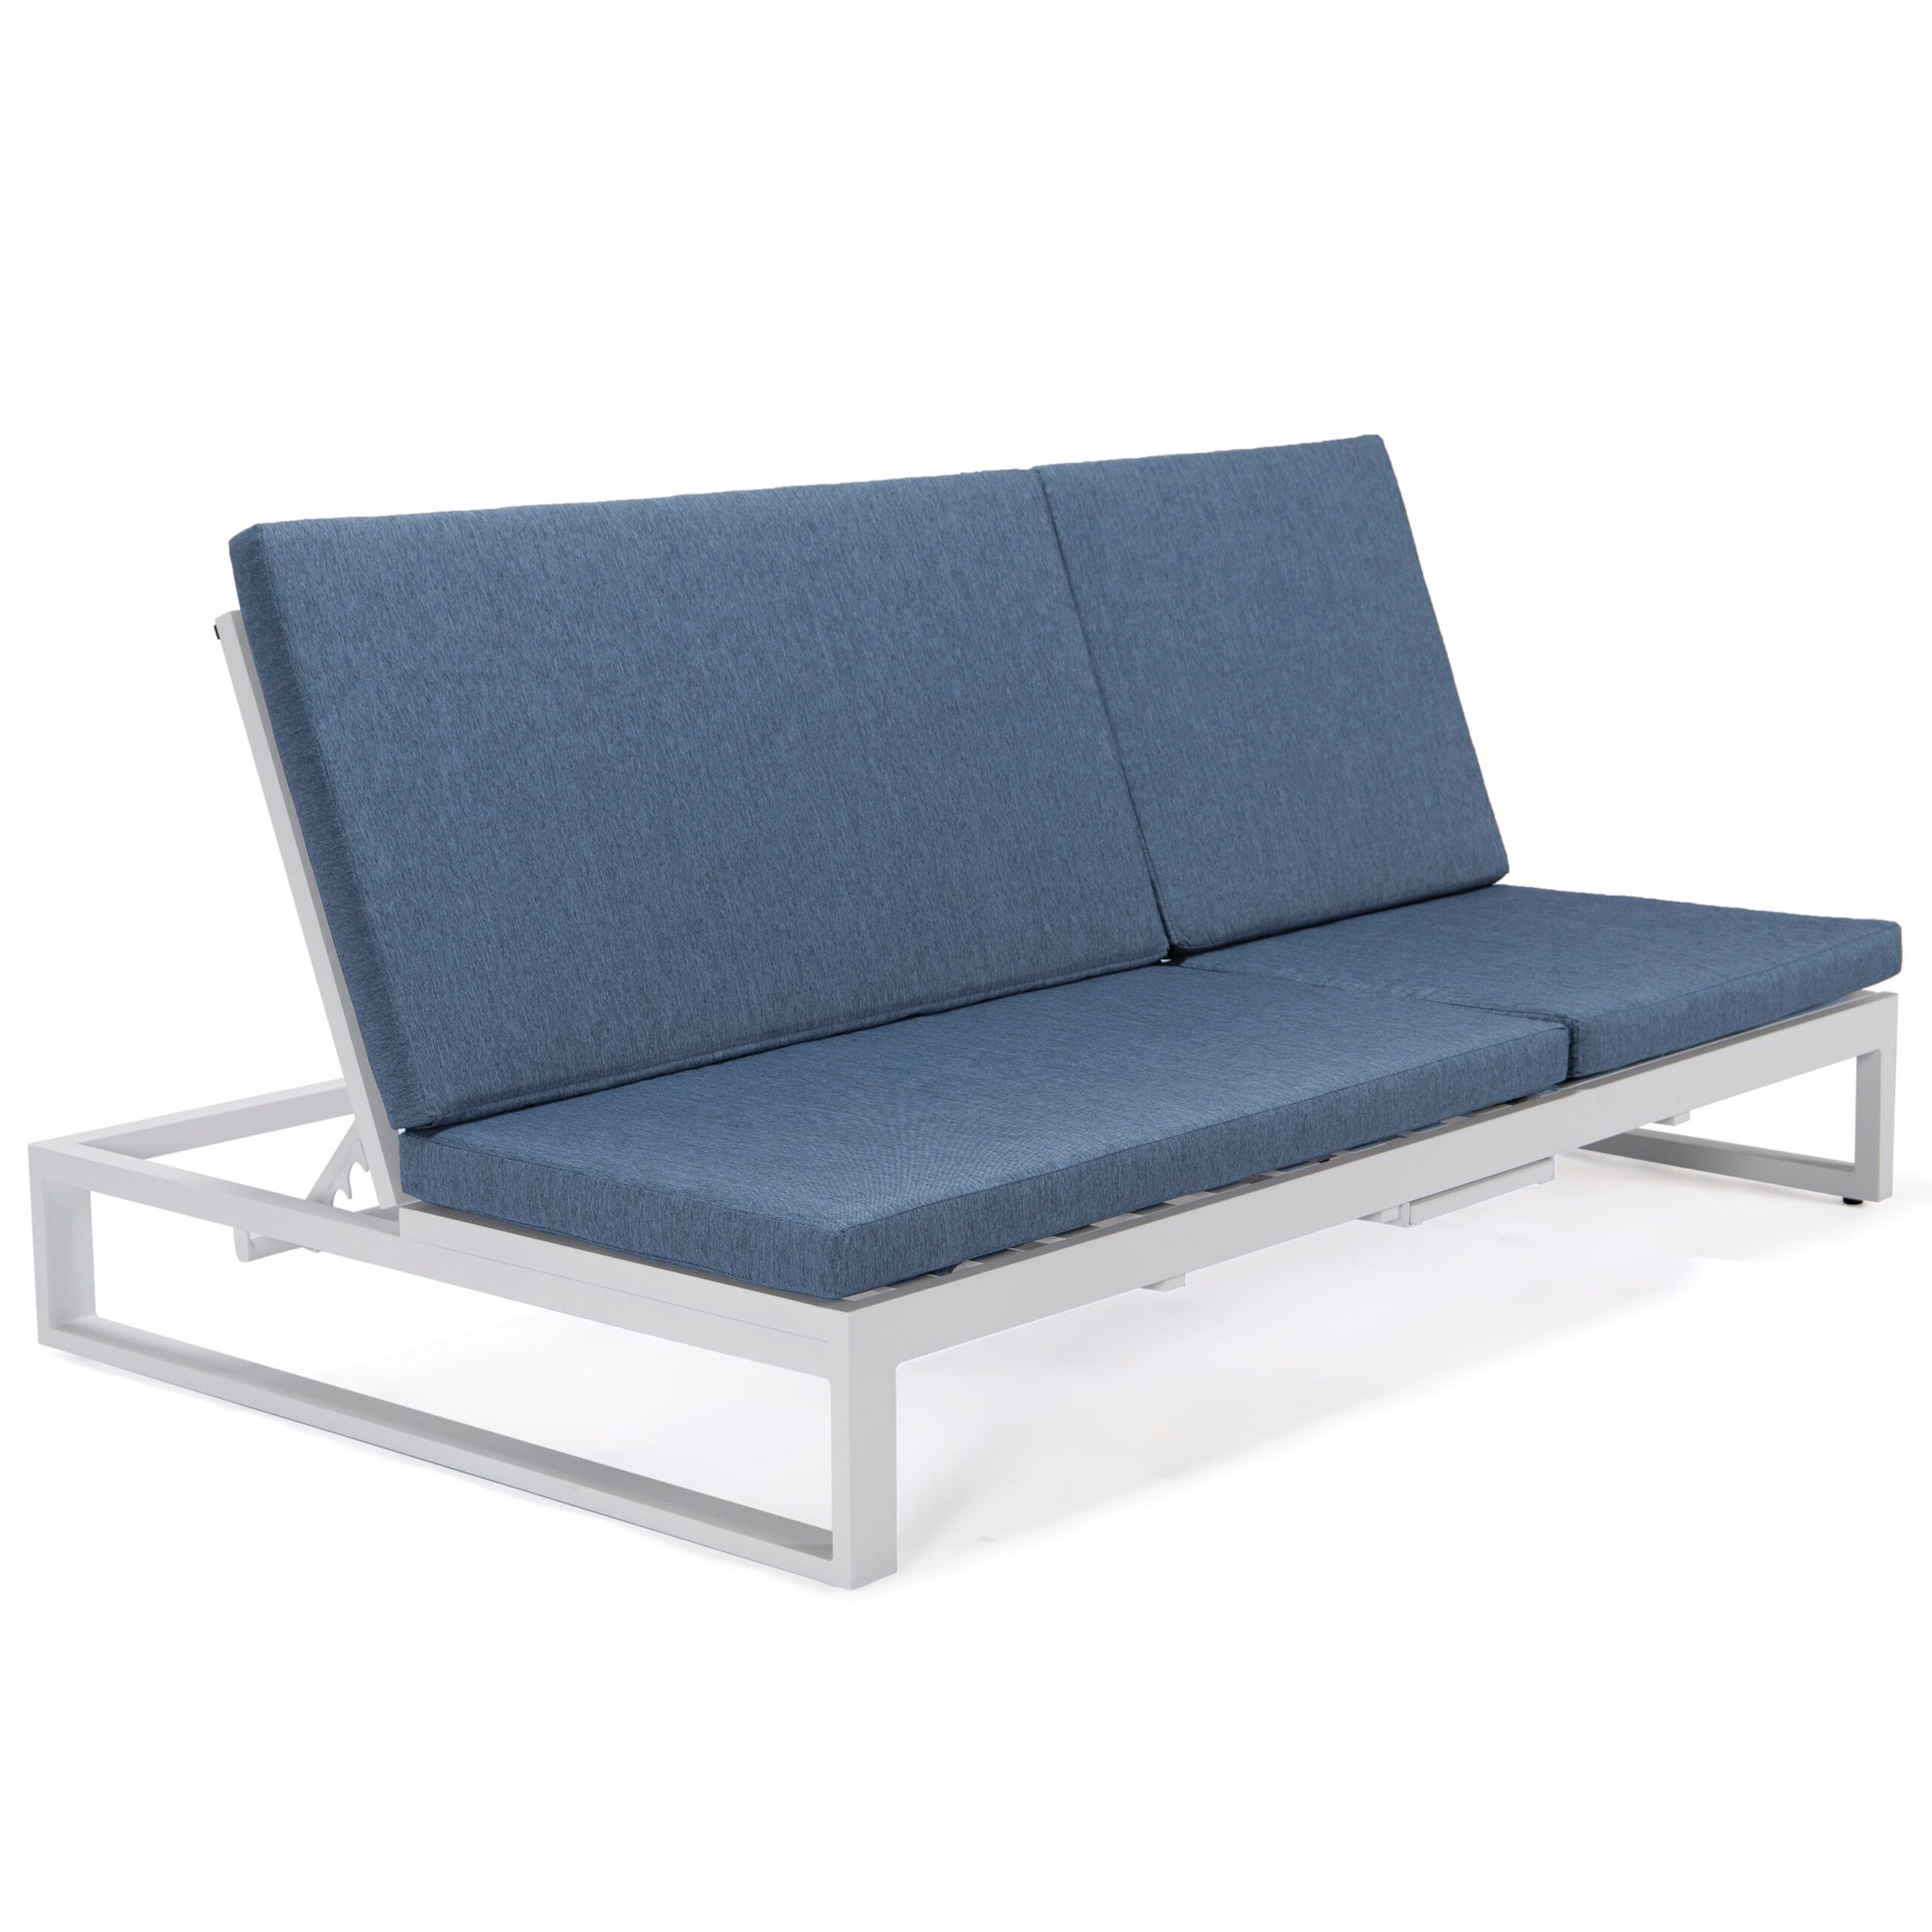 Leisuremod Chelsea Patio 2 In 1 Convertible Sofa Double Chaise Lounge